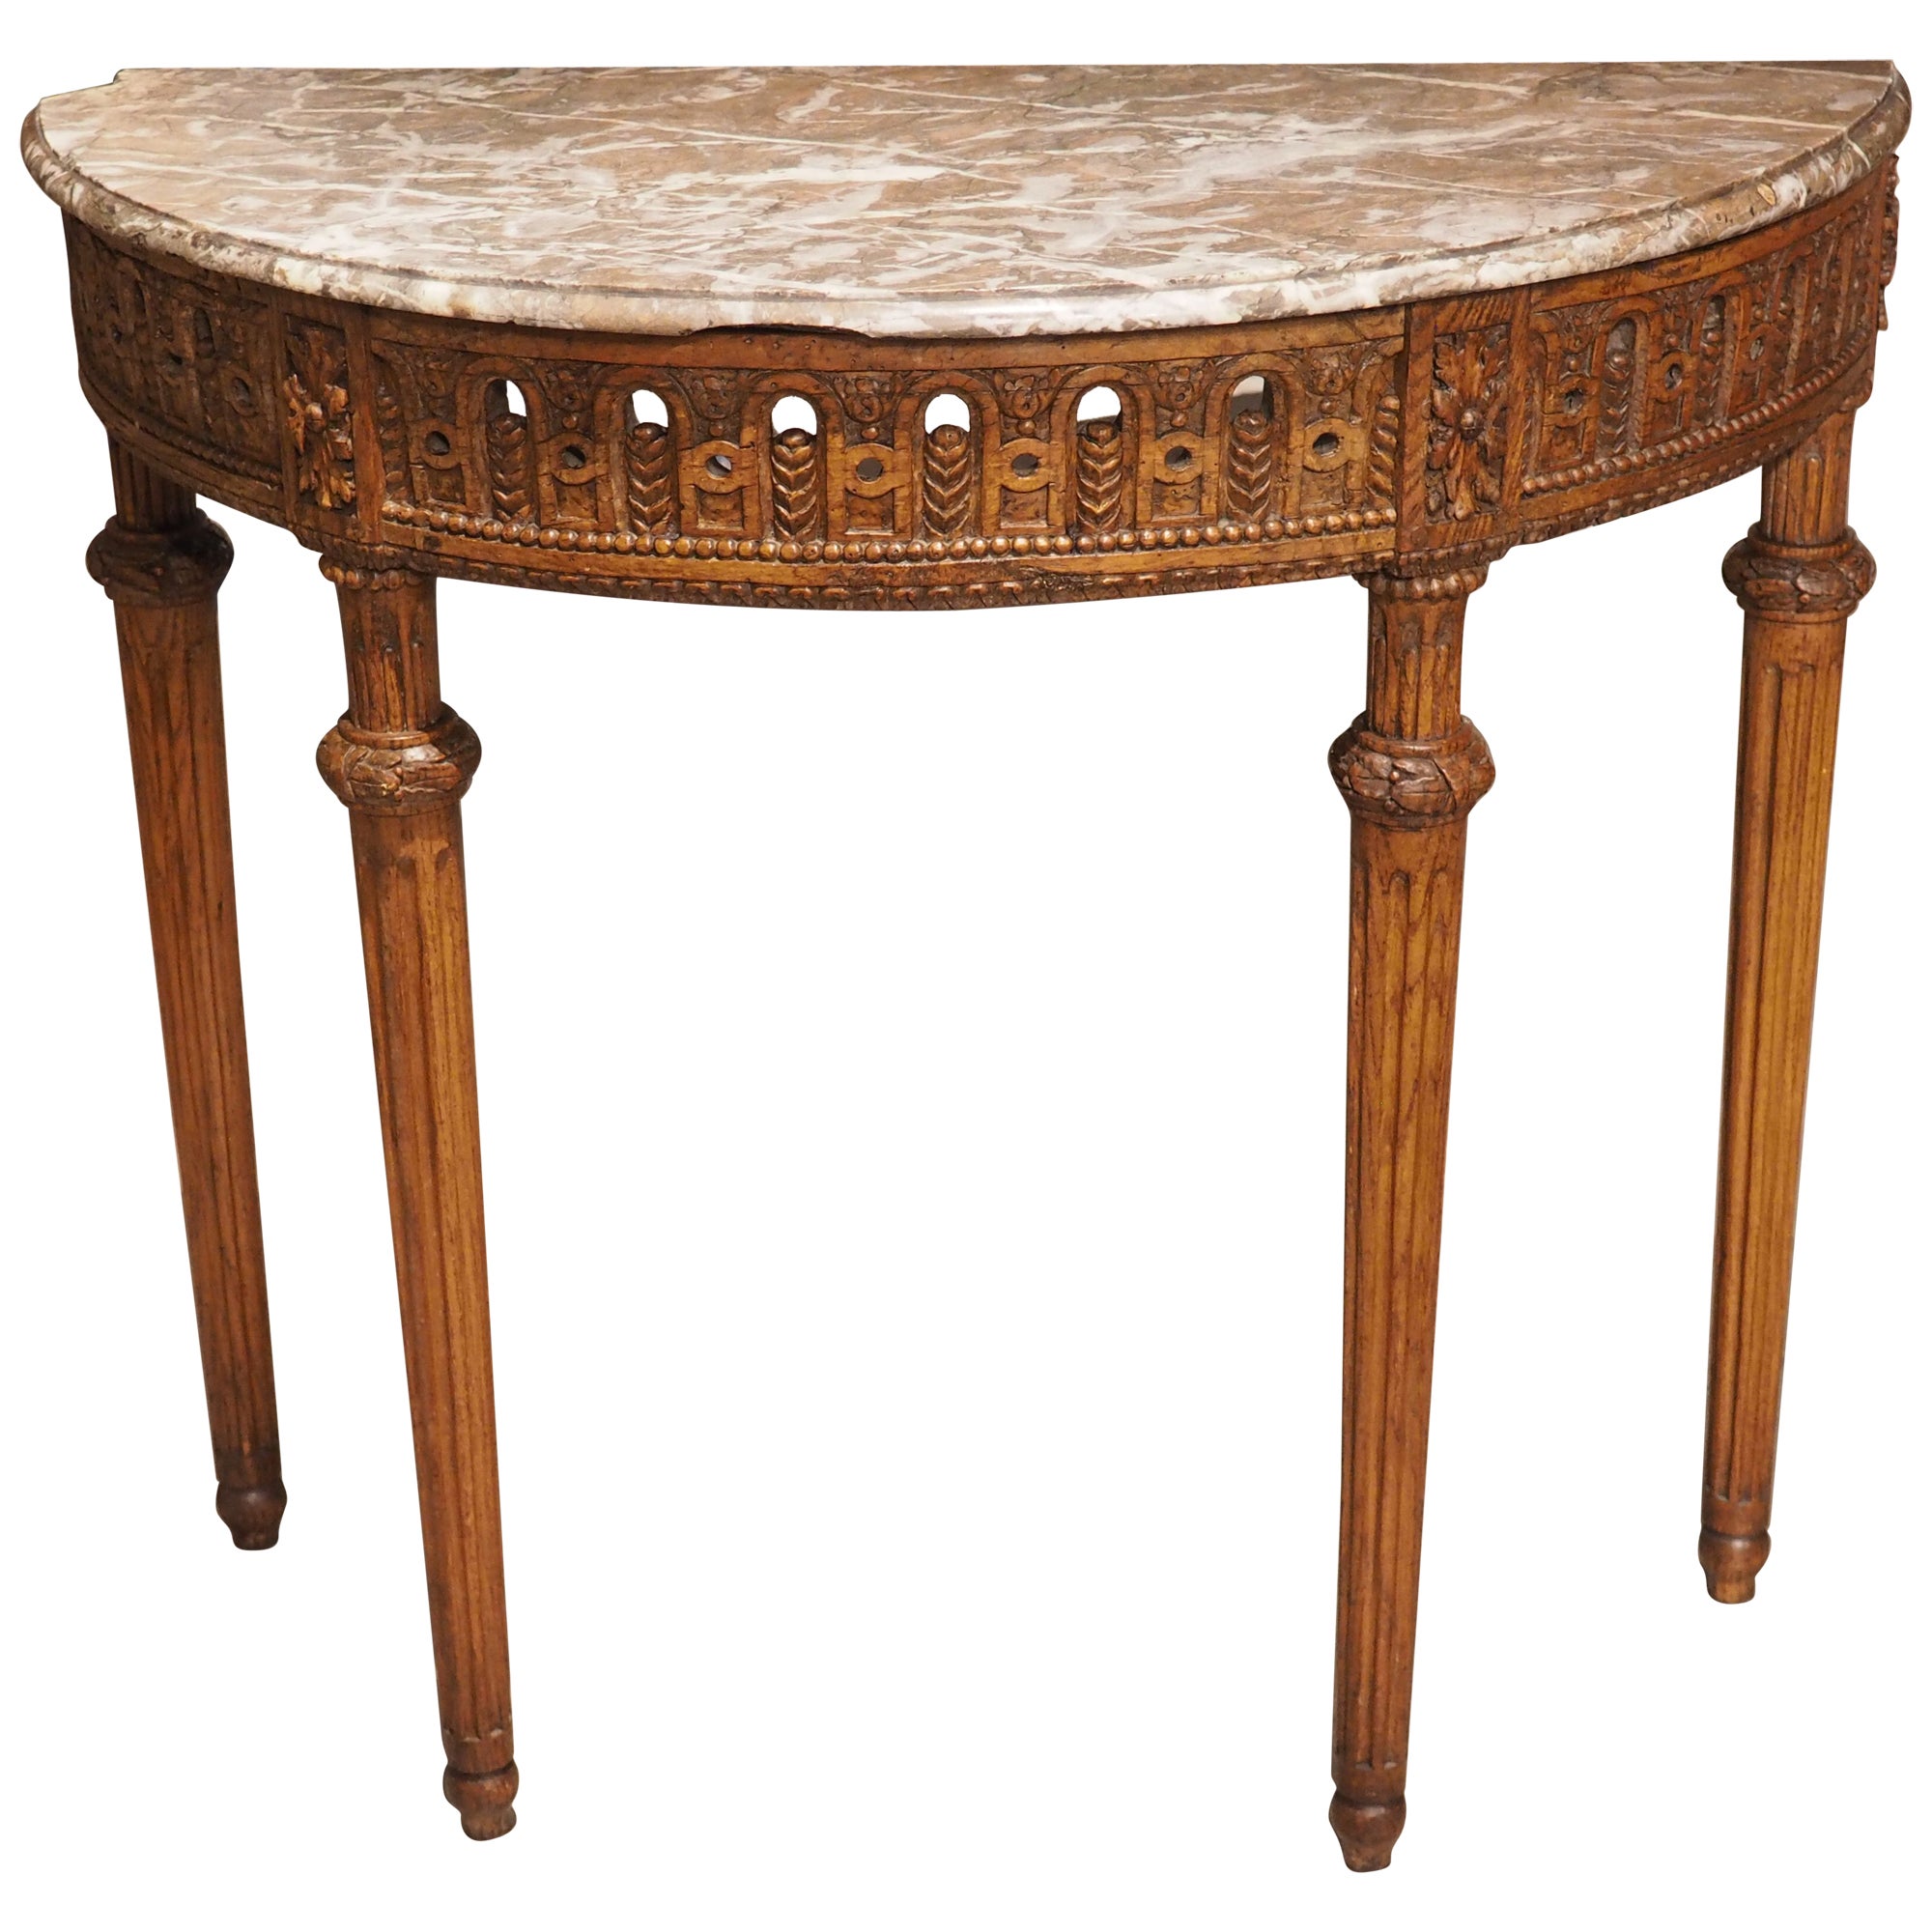 Period French Louis XVI Carved Oak and Marble Demi Lune Console Table, C. 1785 For Sale